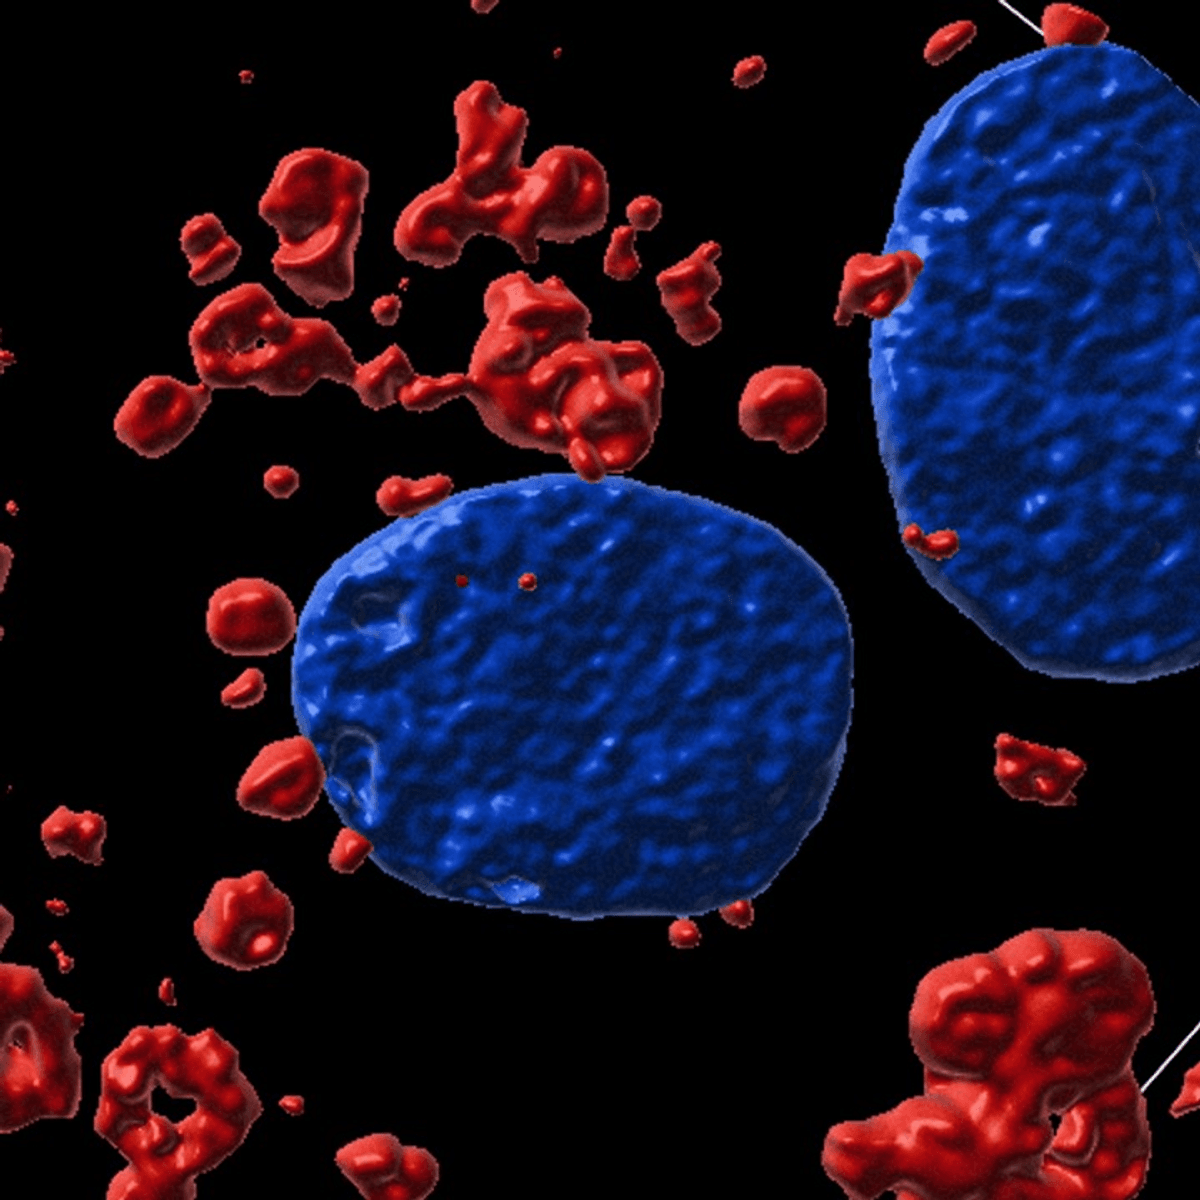 Microscopy image showing nuclei stained blue with DAPI and accumulating lysosomes stained red in proximal tubule cells.